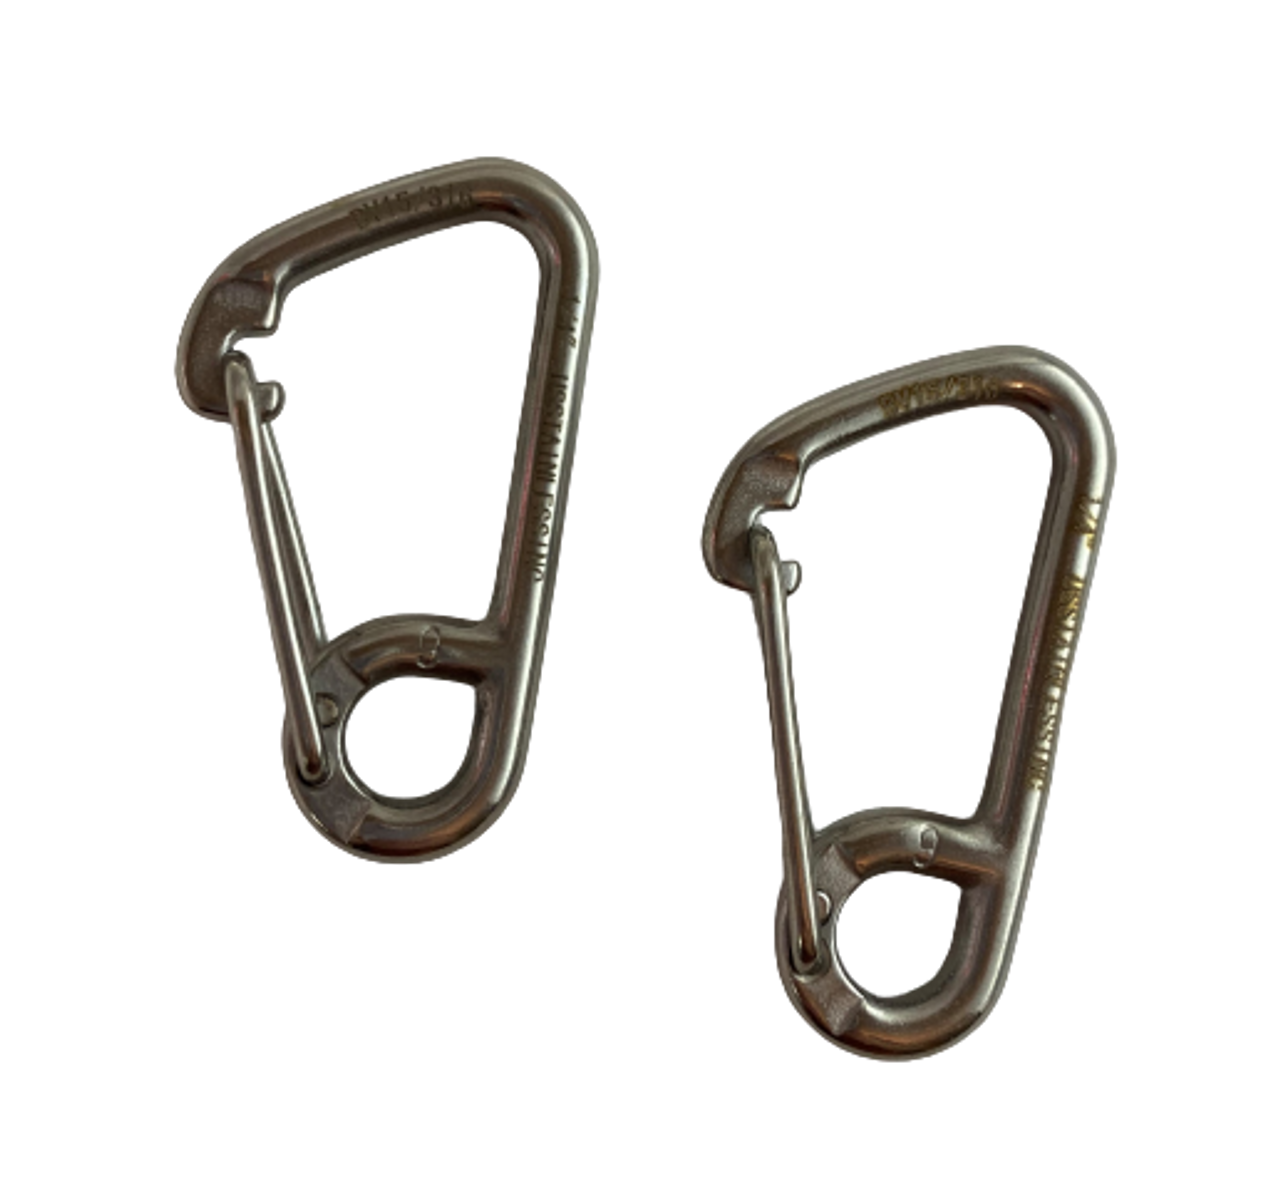 2 Pieces Stainless Steel 316 Asymmetrical Spring Hook Carabiner Casting End  with Eye 1/4 (6mm) Marine Grade - US Stainless